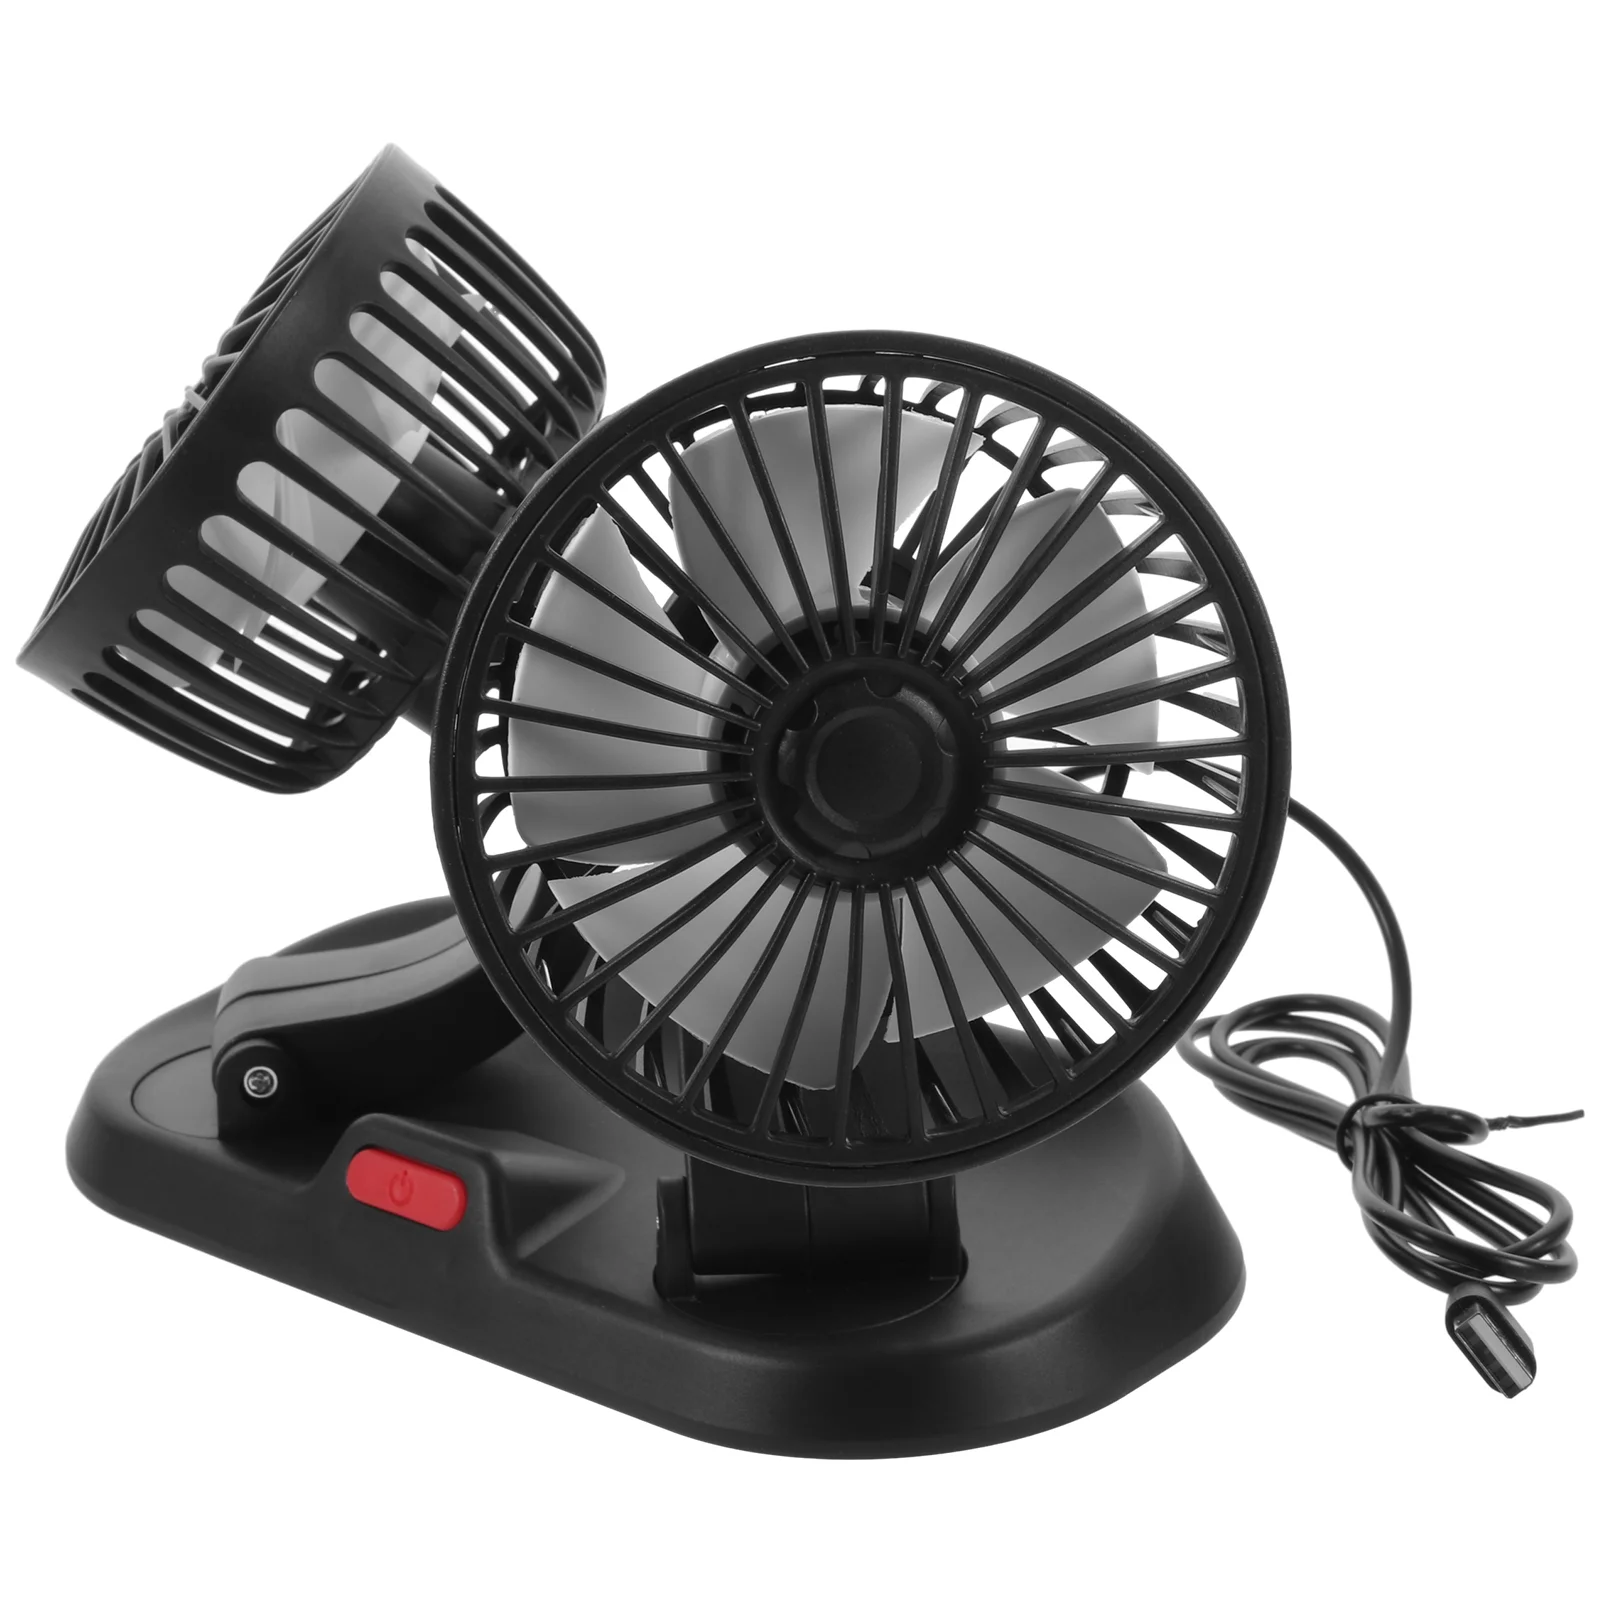 

Car Household Double-headed Fan Adjustable Multi-functional Mini Small Fans That Blow Cold Air Truck Dashboard